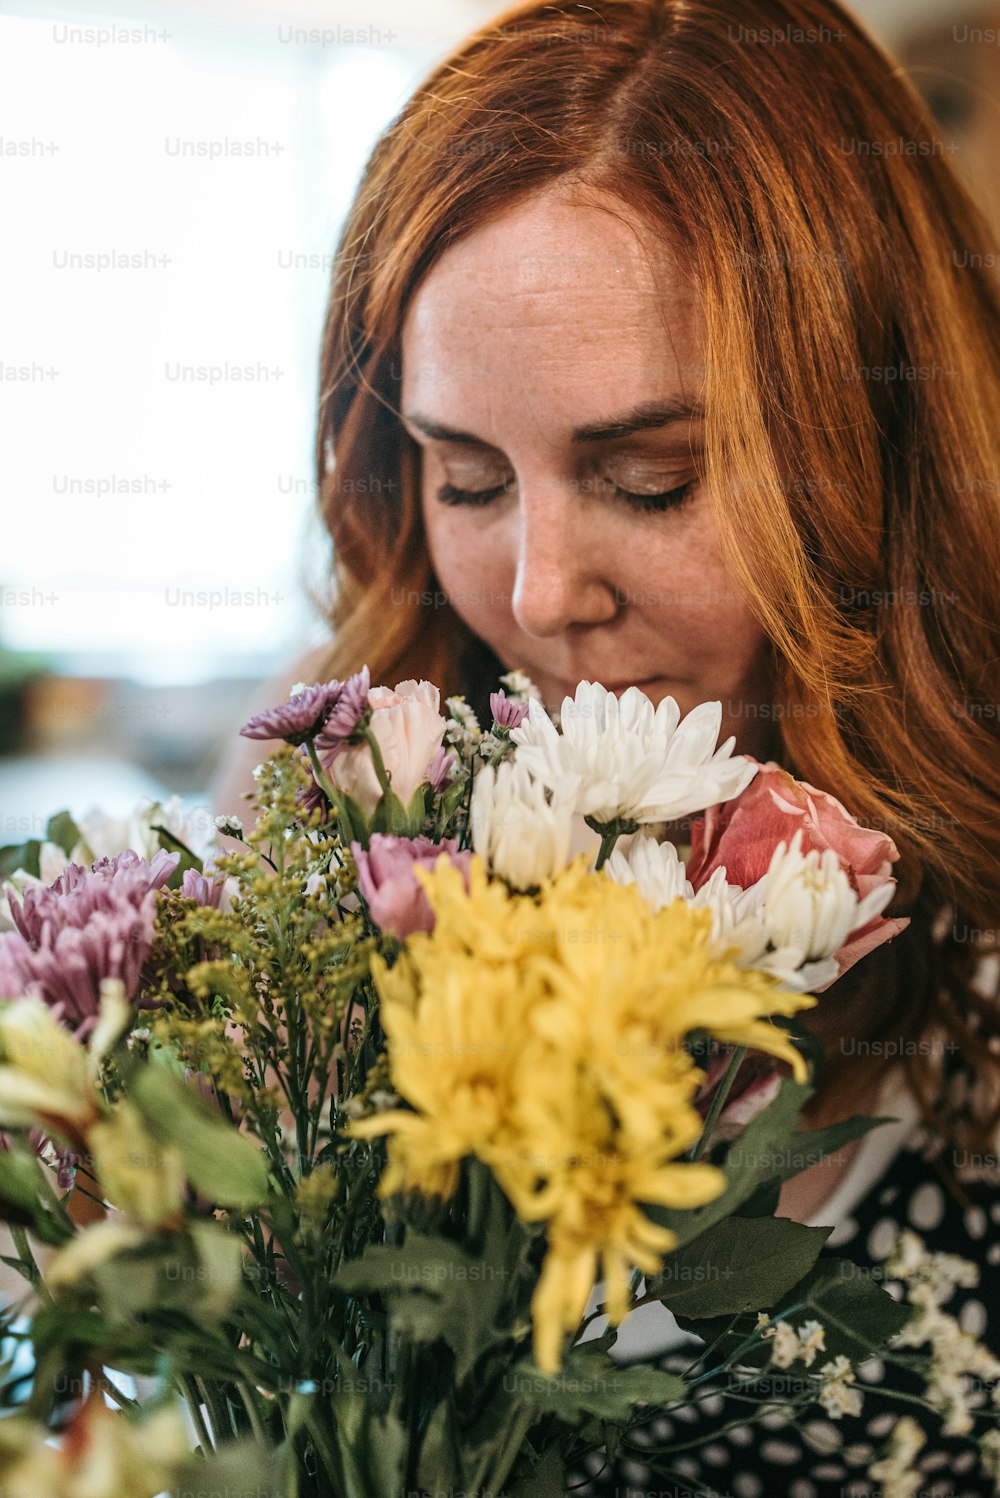 a woman smelling a bunch of flowers in a vase